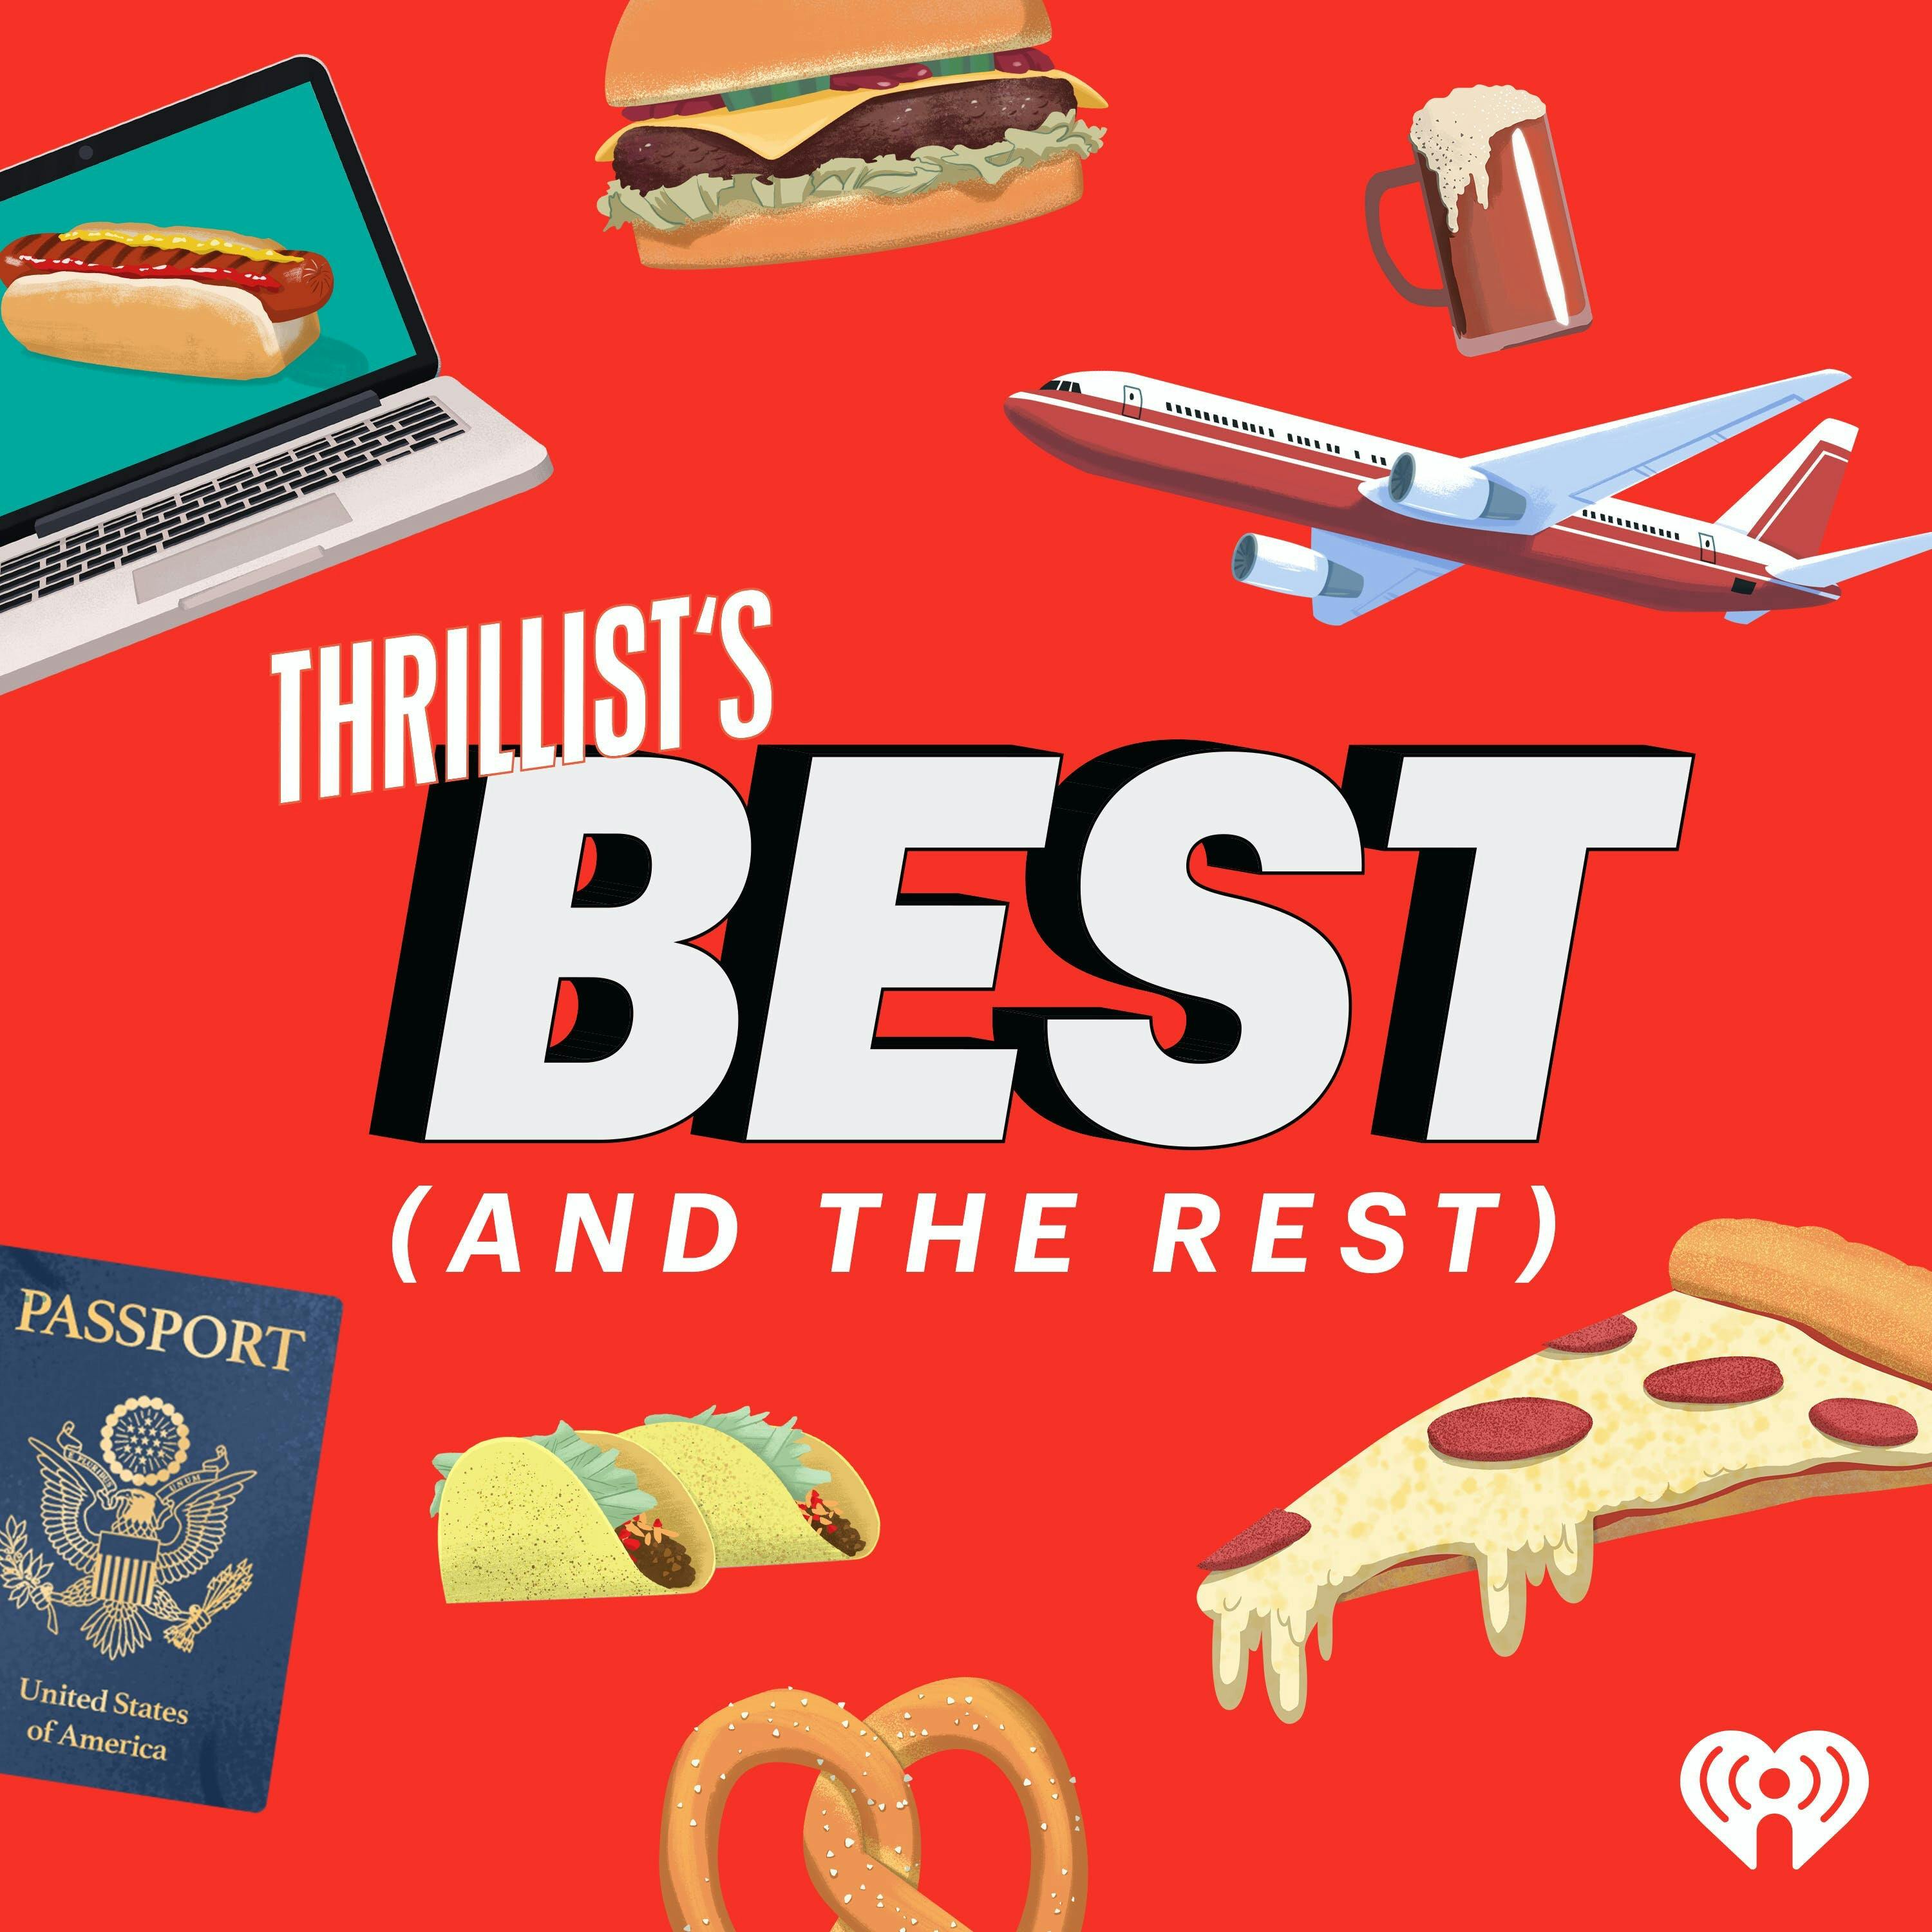 THRILLIST'S BEST: How the Service Industry Is Helping Each Other Right Now